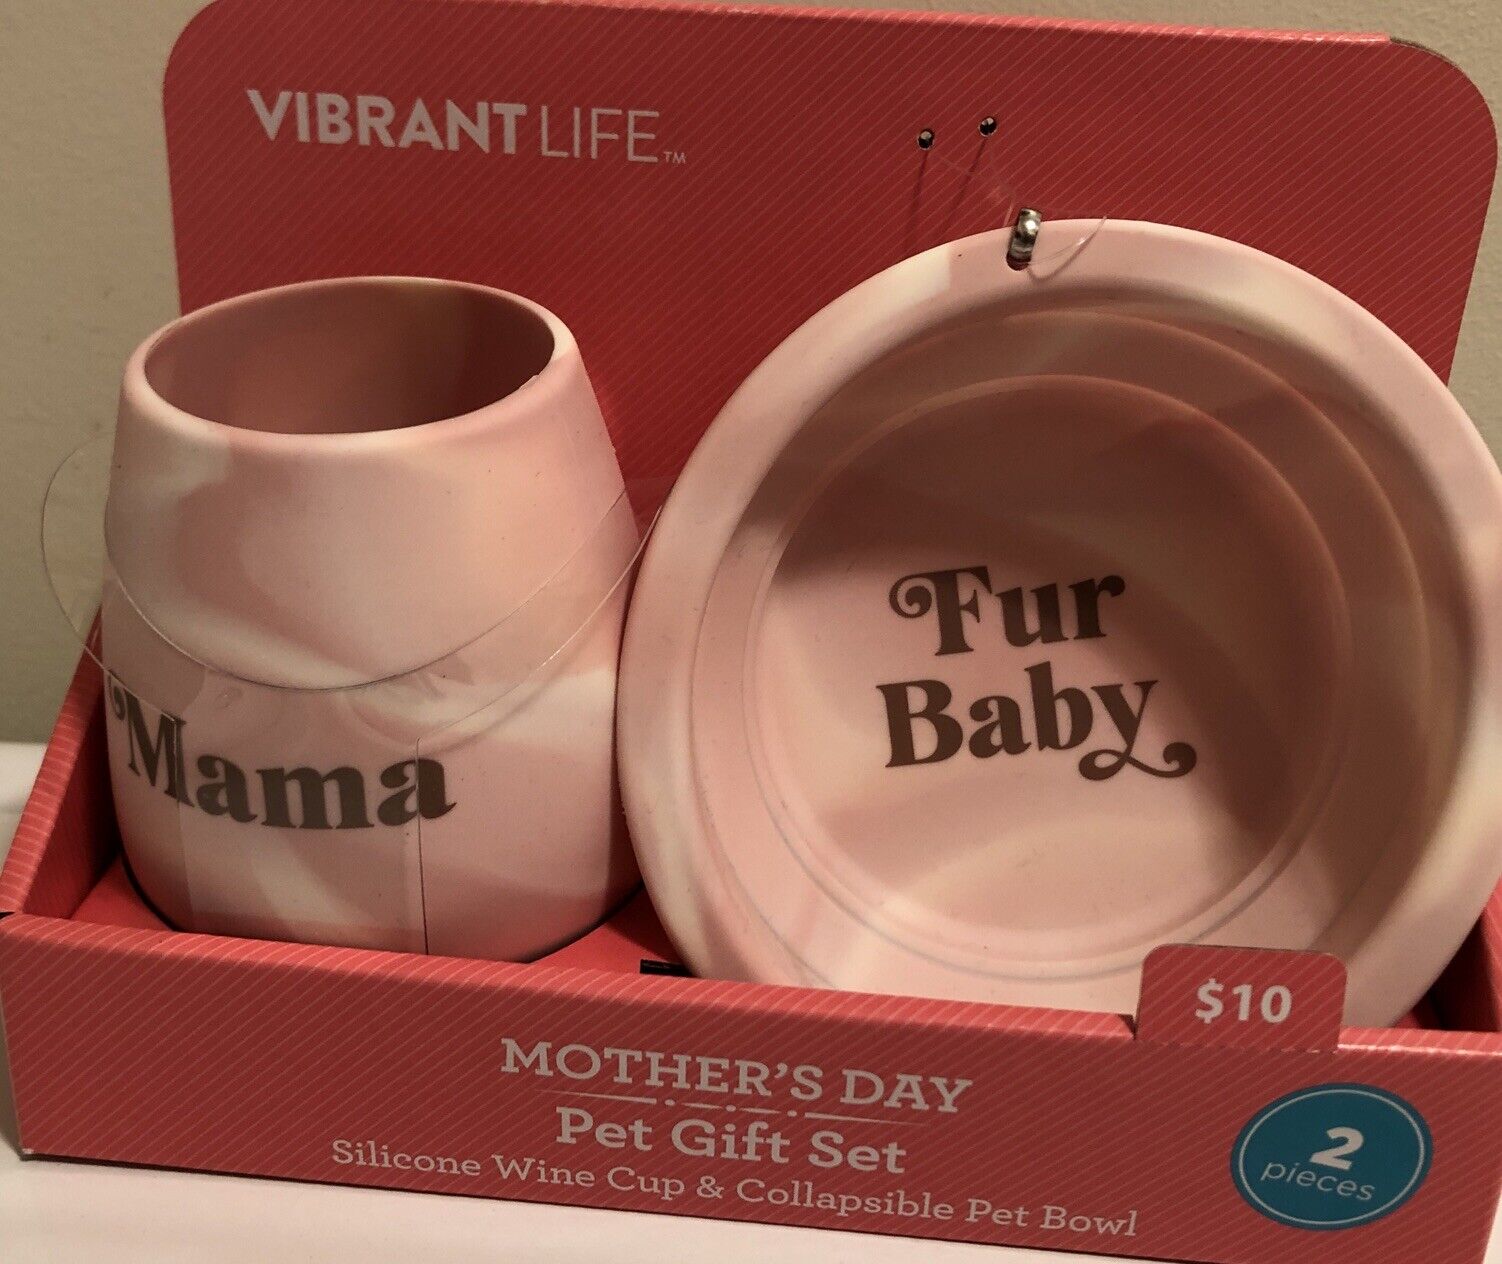 Vibrant Life Silicone Wine Cup & Collapsible Pet Bowl Gift Set New Dog Cat Pink